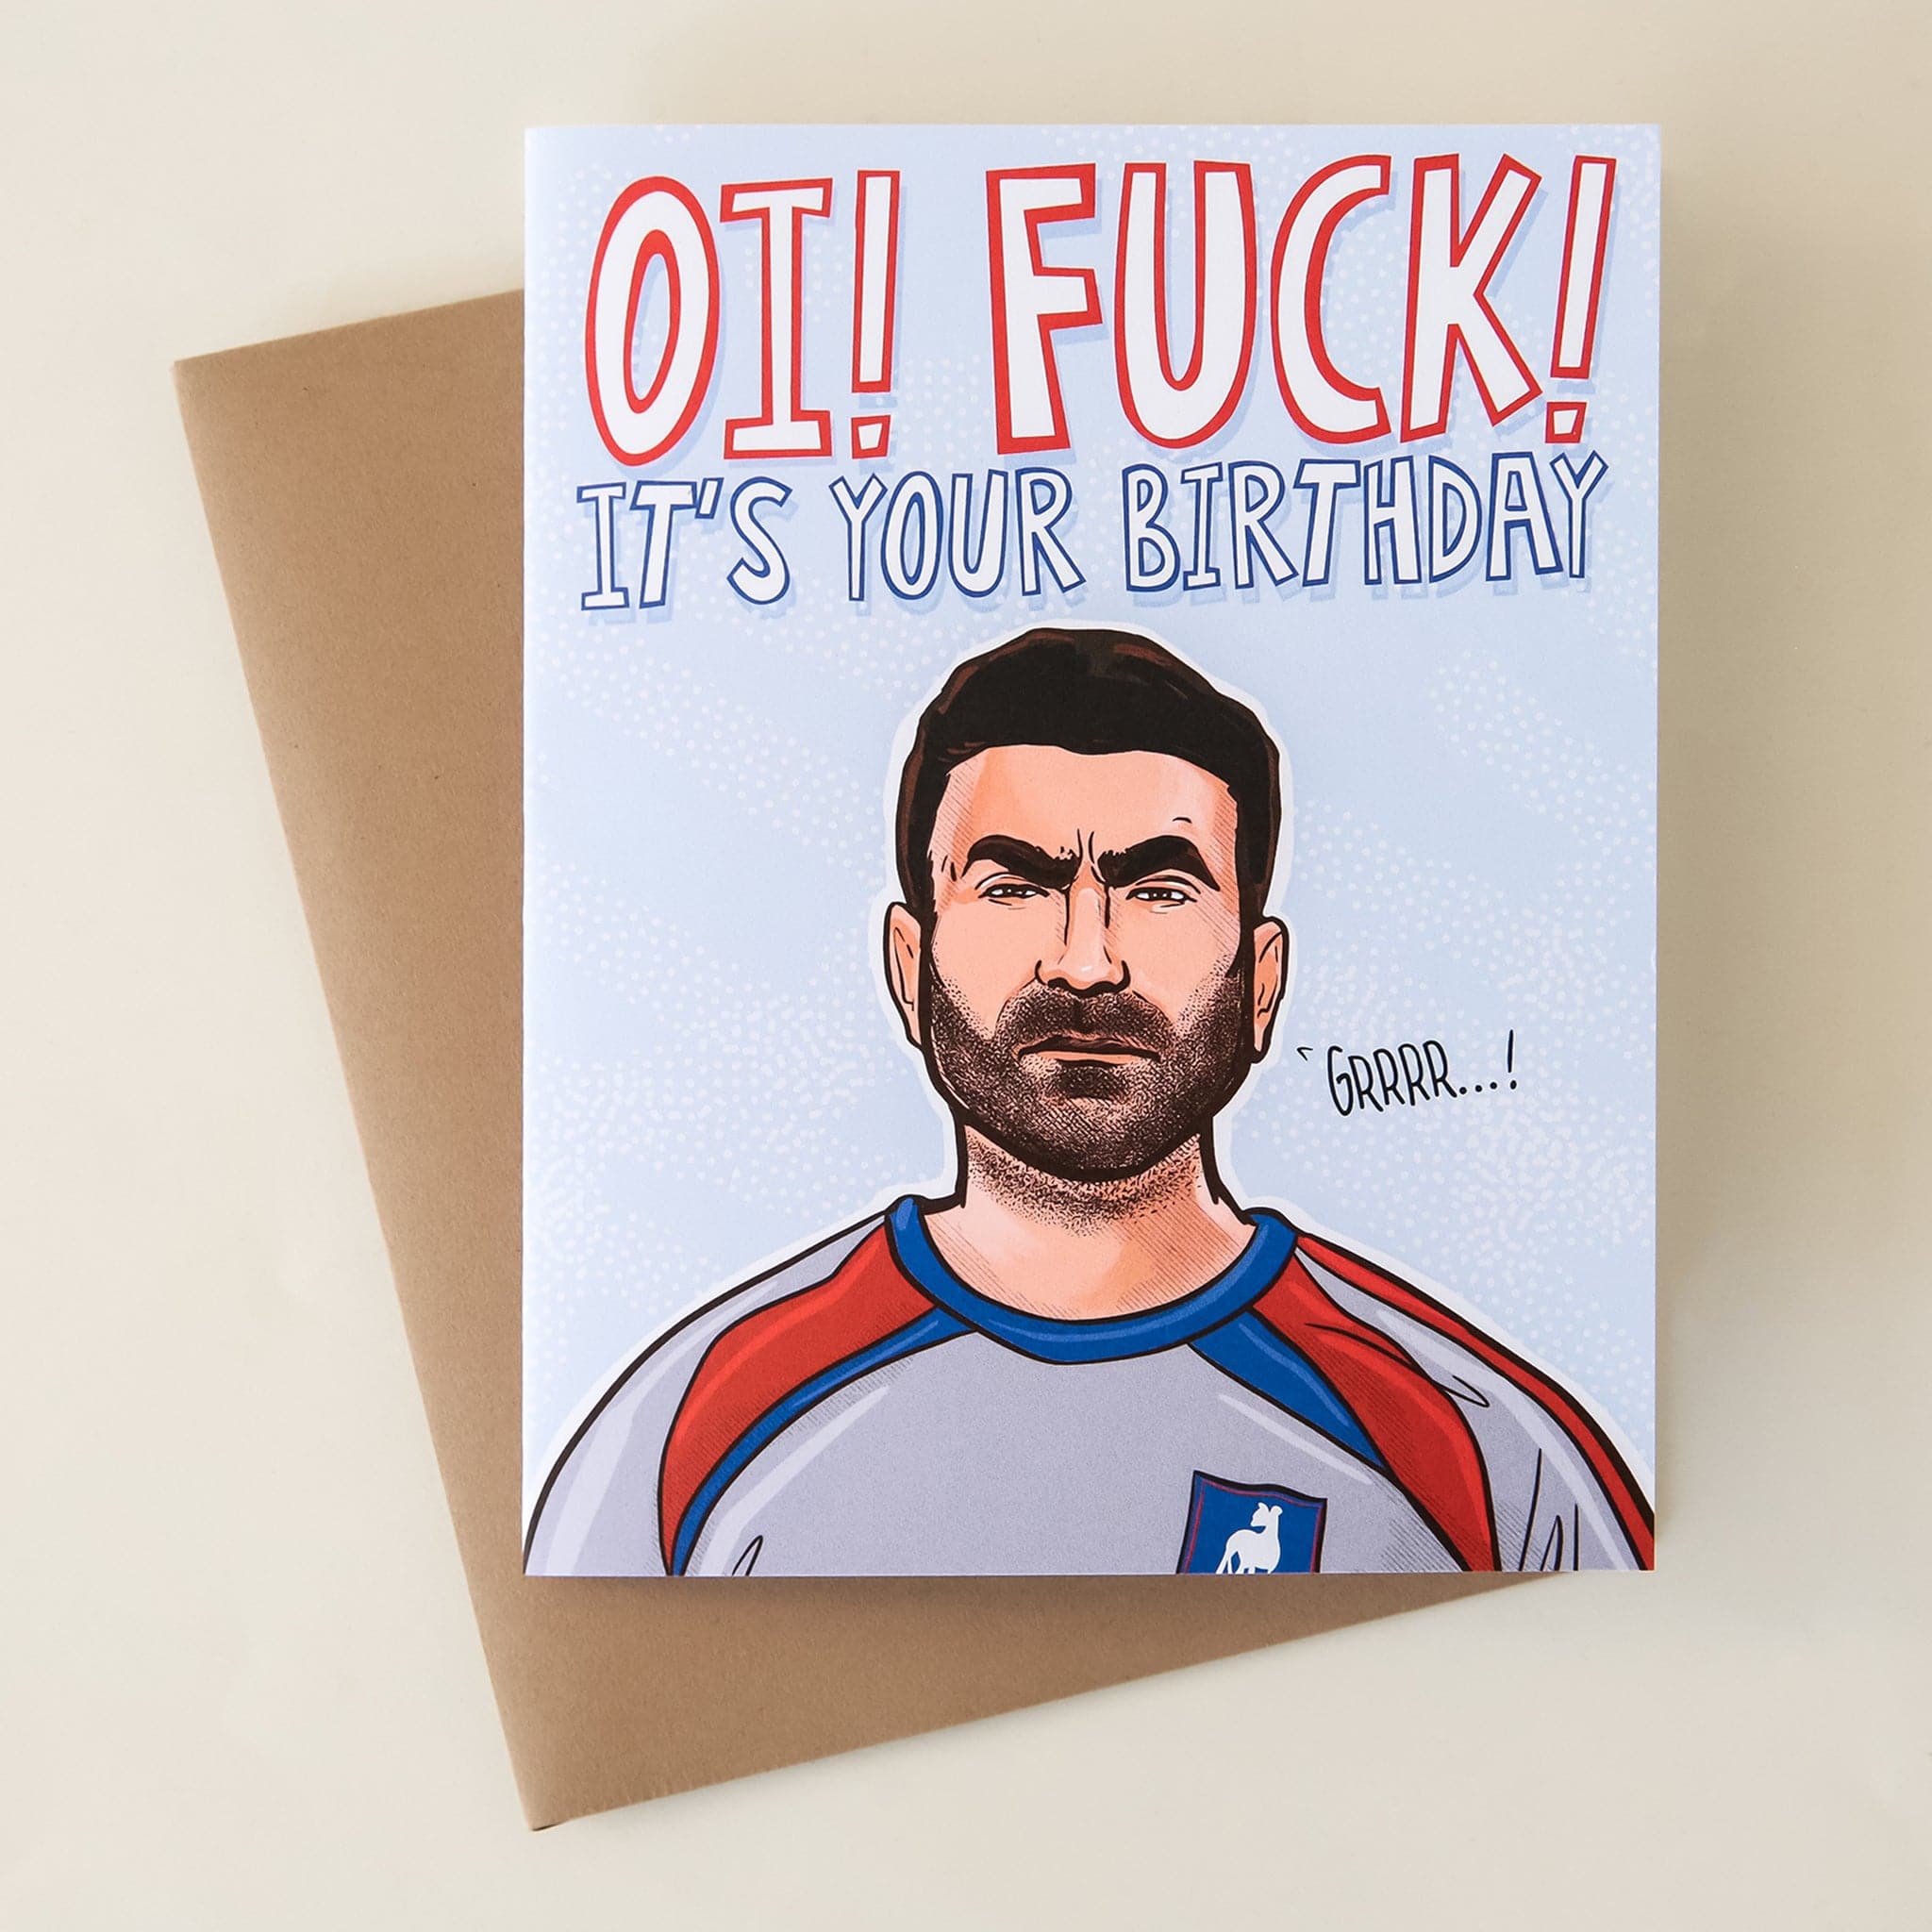 On top of a brown envelope is a light blue card. At top is white text that reads ‘OI! Fuck! It’s your birthday.’ Below is a drawing of the top half of a man wearing a grey, blue and red jersey. He has dark brown hair and brown beard. Next to him is black text that reads ‘grrrr…!'